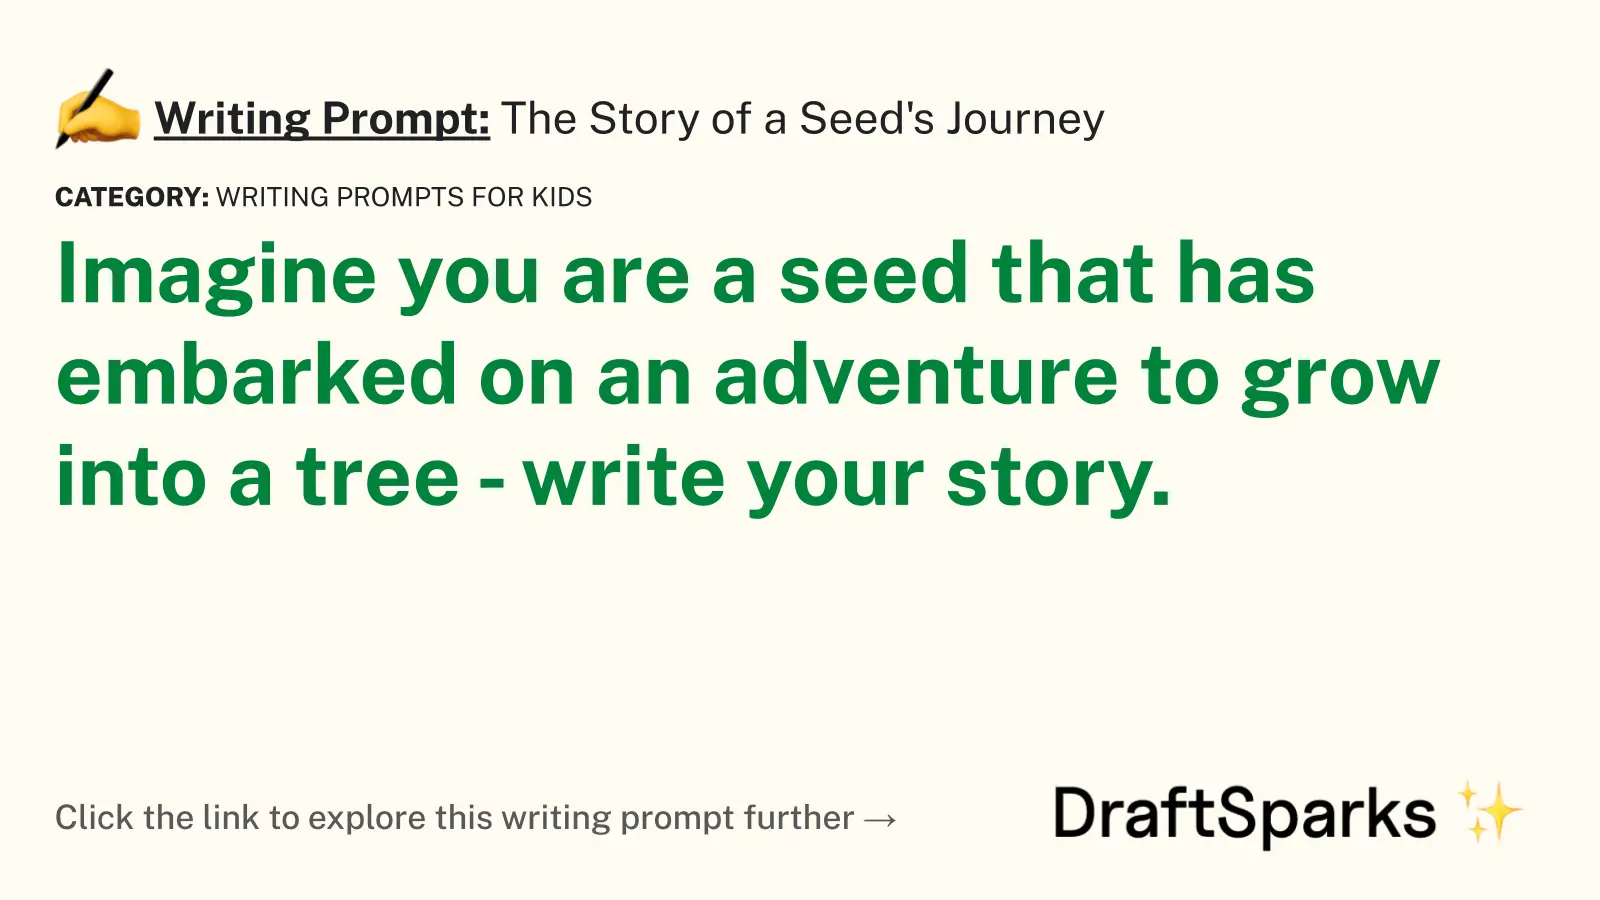 The Story of a Seed’s Journey